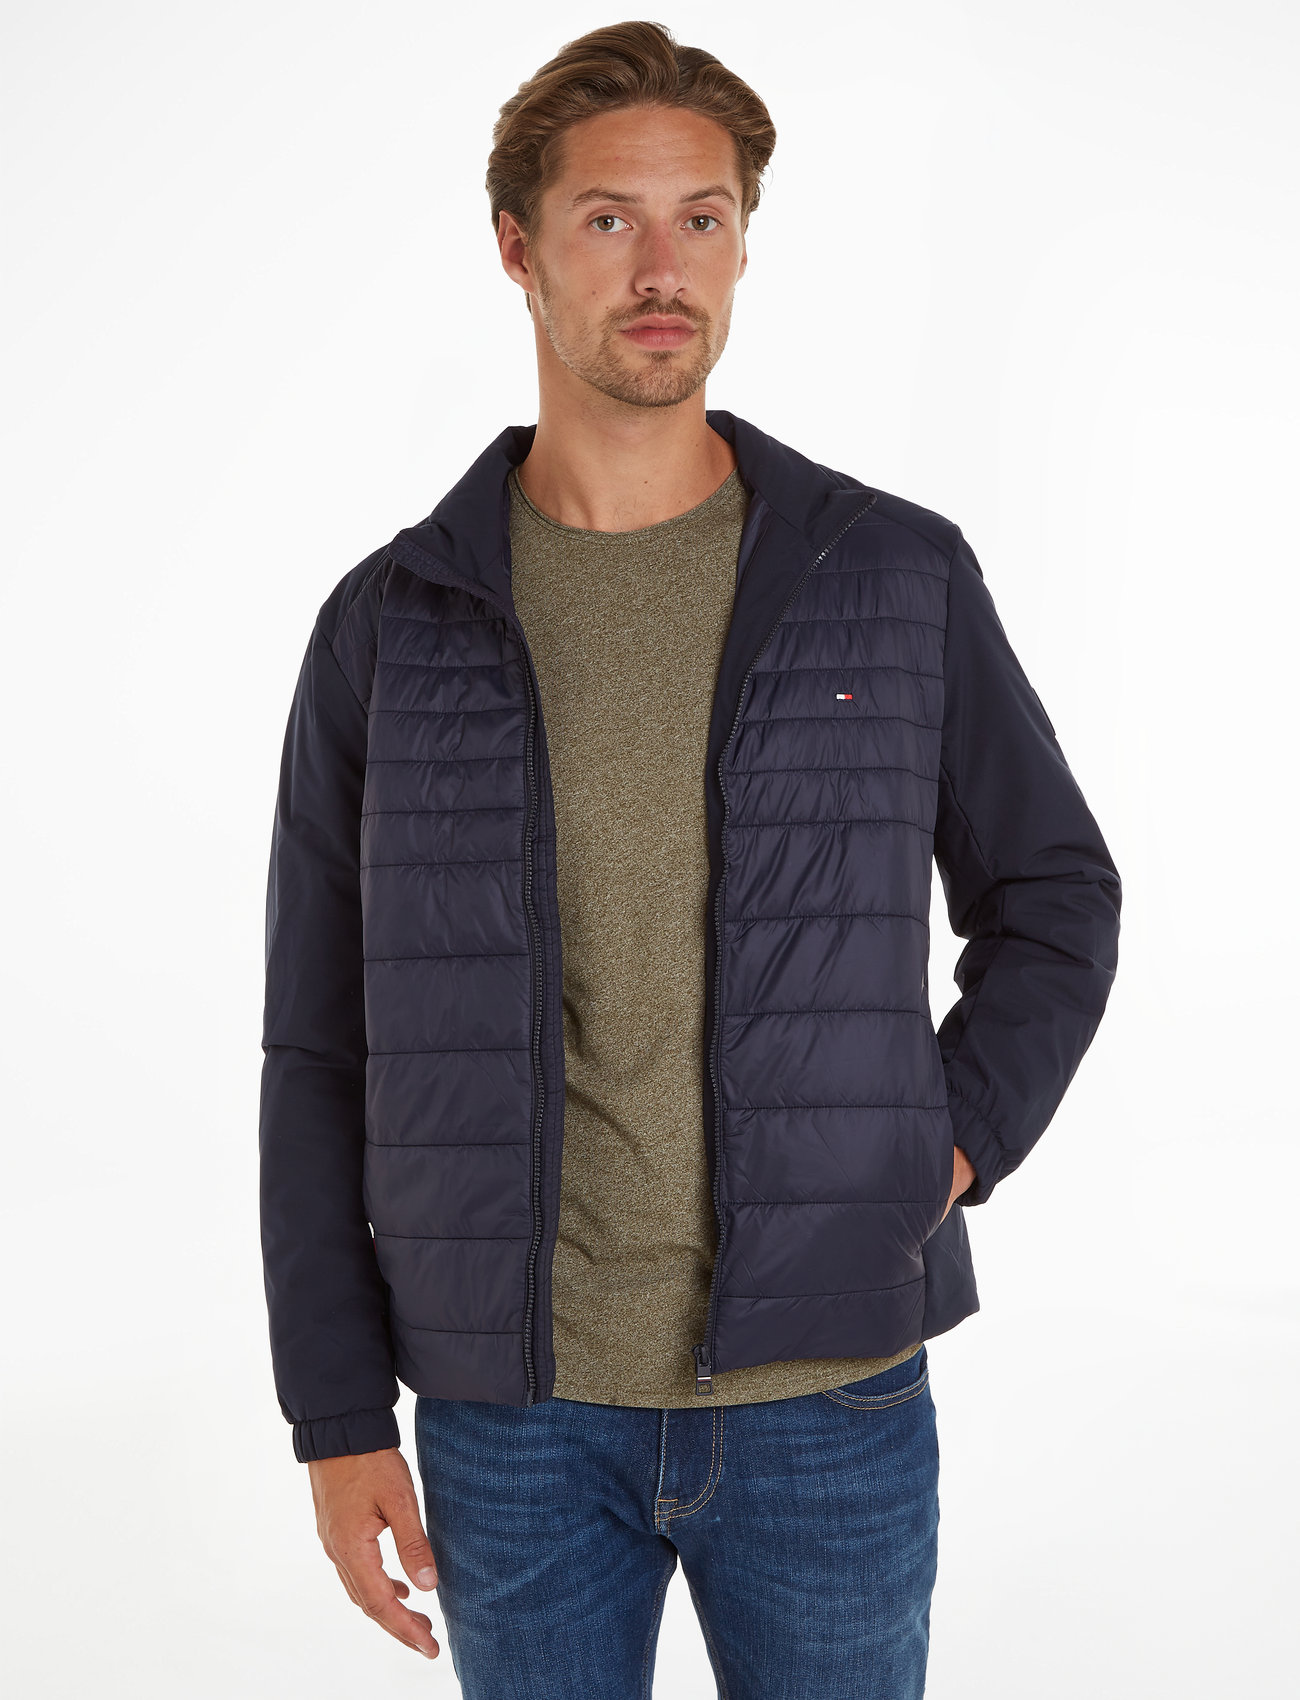 Tommy Hilfiger Cl delivery 129.94 €. from Hilfiger Quilted Mix Collar jackets Boozt.com. Buy Fast Stand easy online Media Tommy returns and Jacket at 